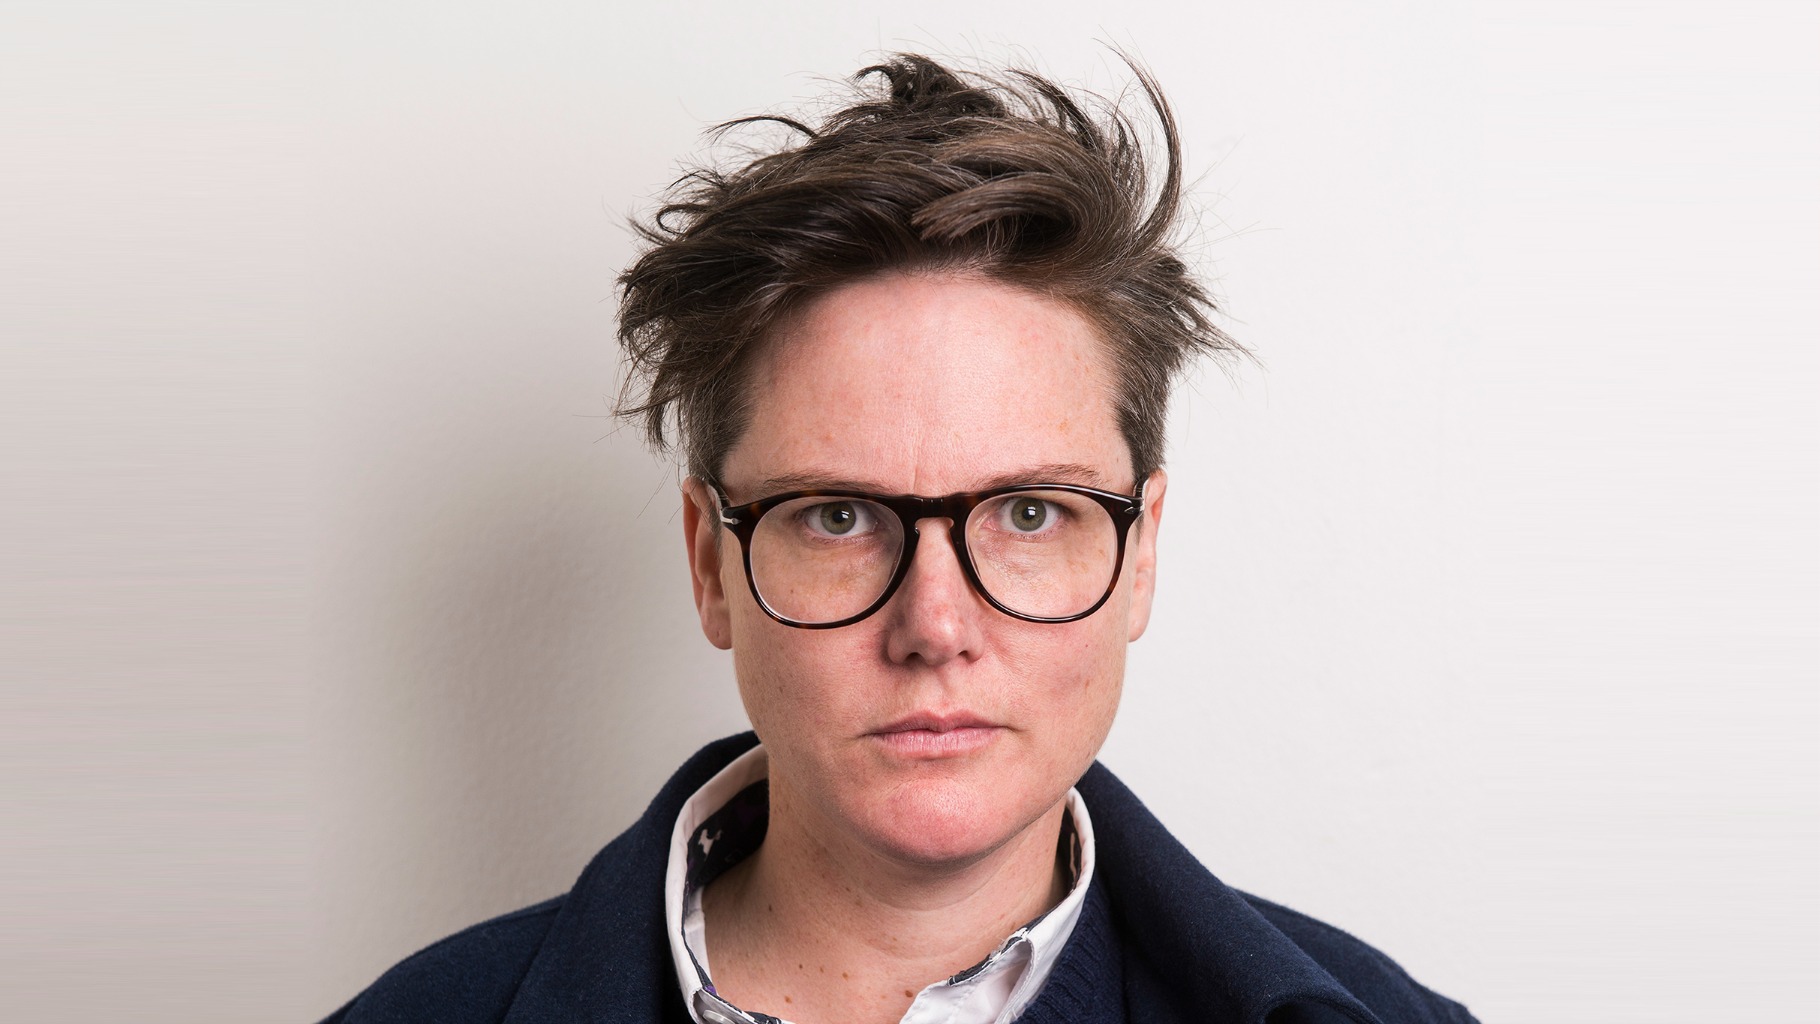 Hannah Gadsby to take permanent break from comedy